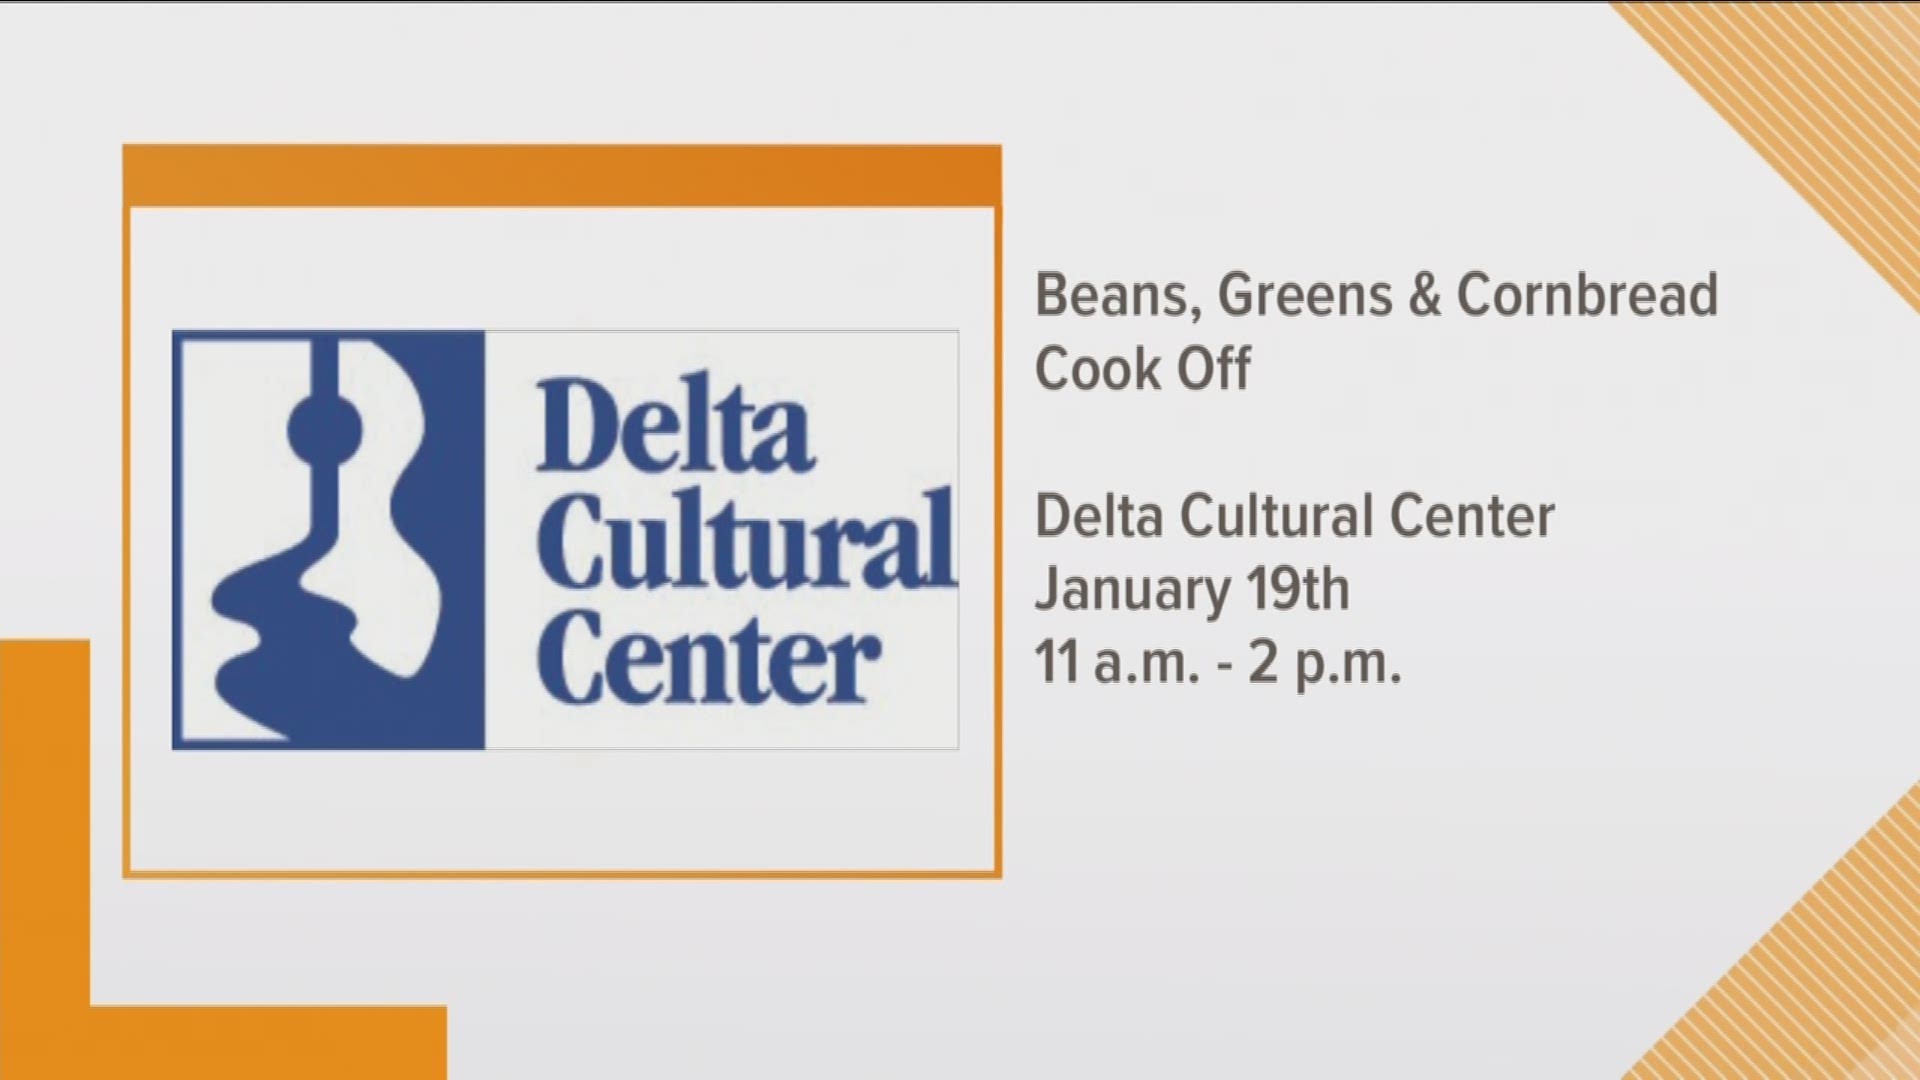 The Delta Cultural Center in Helena is hosting its annual cook off, unique to Arkansas Delta traditional tastes.